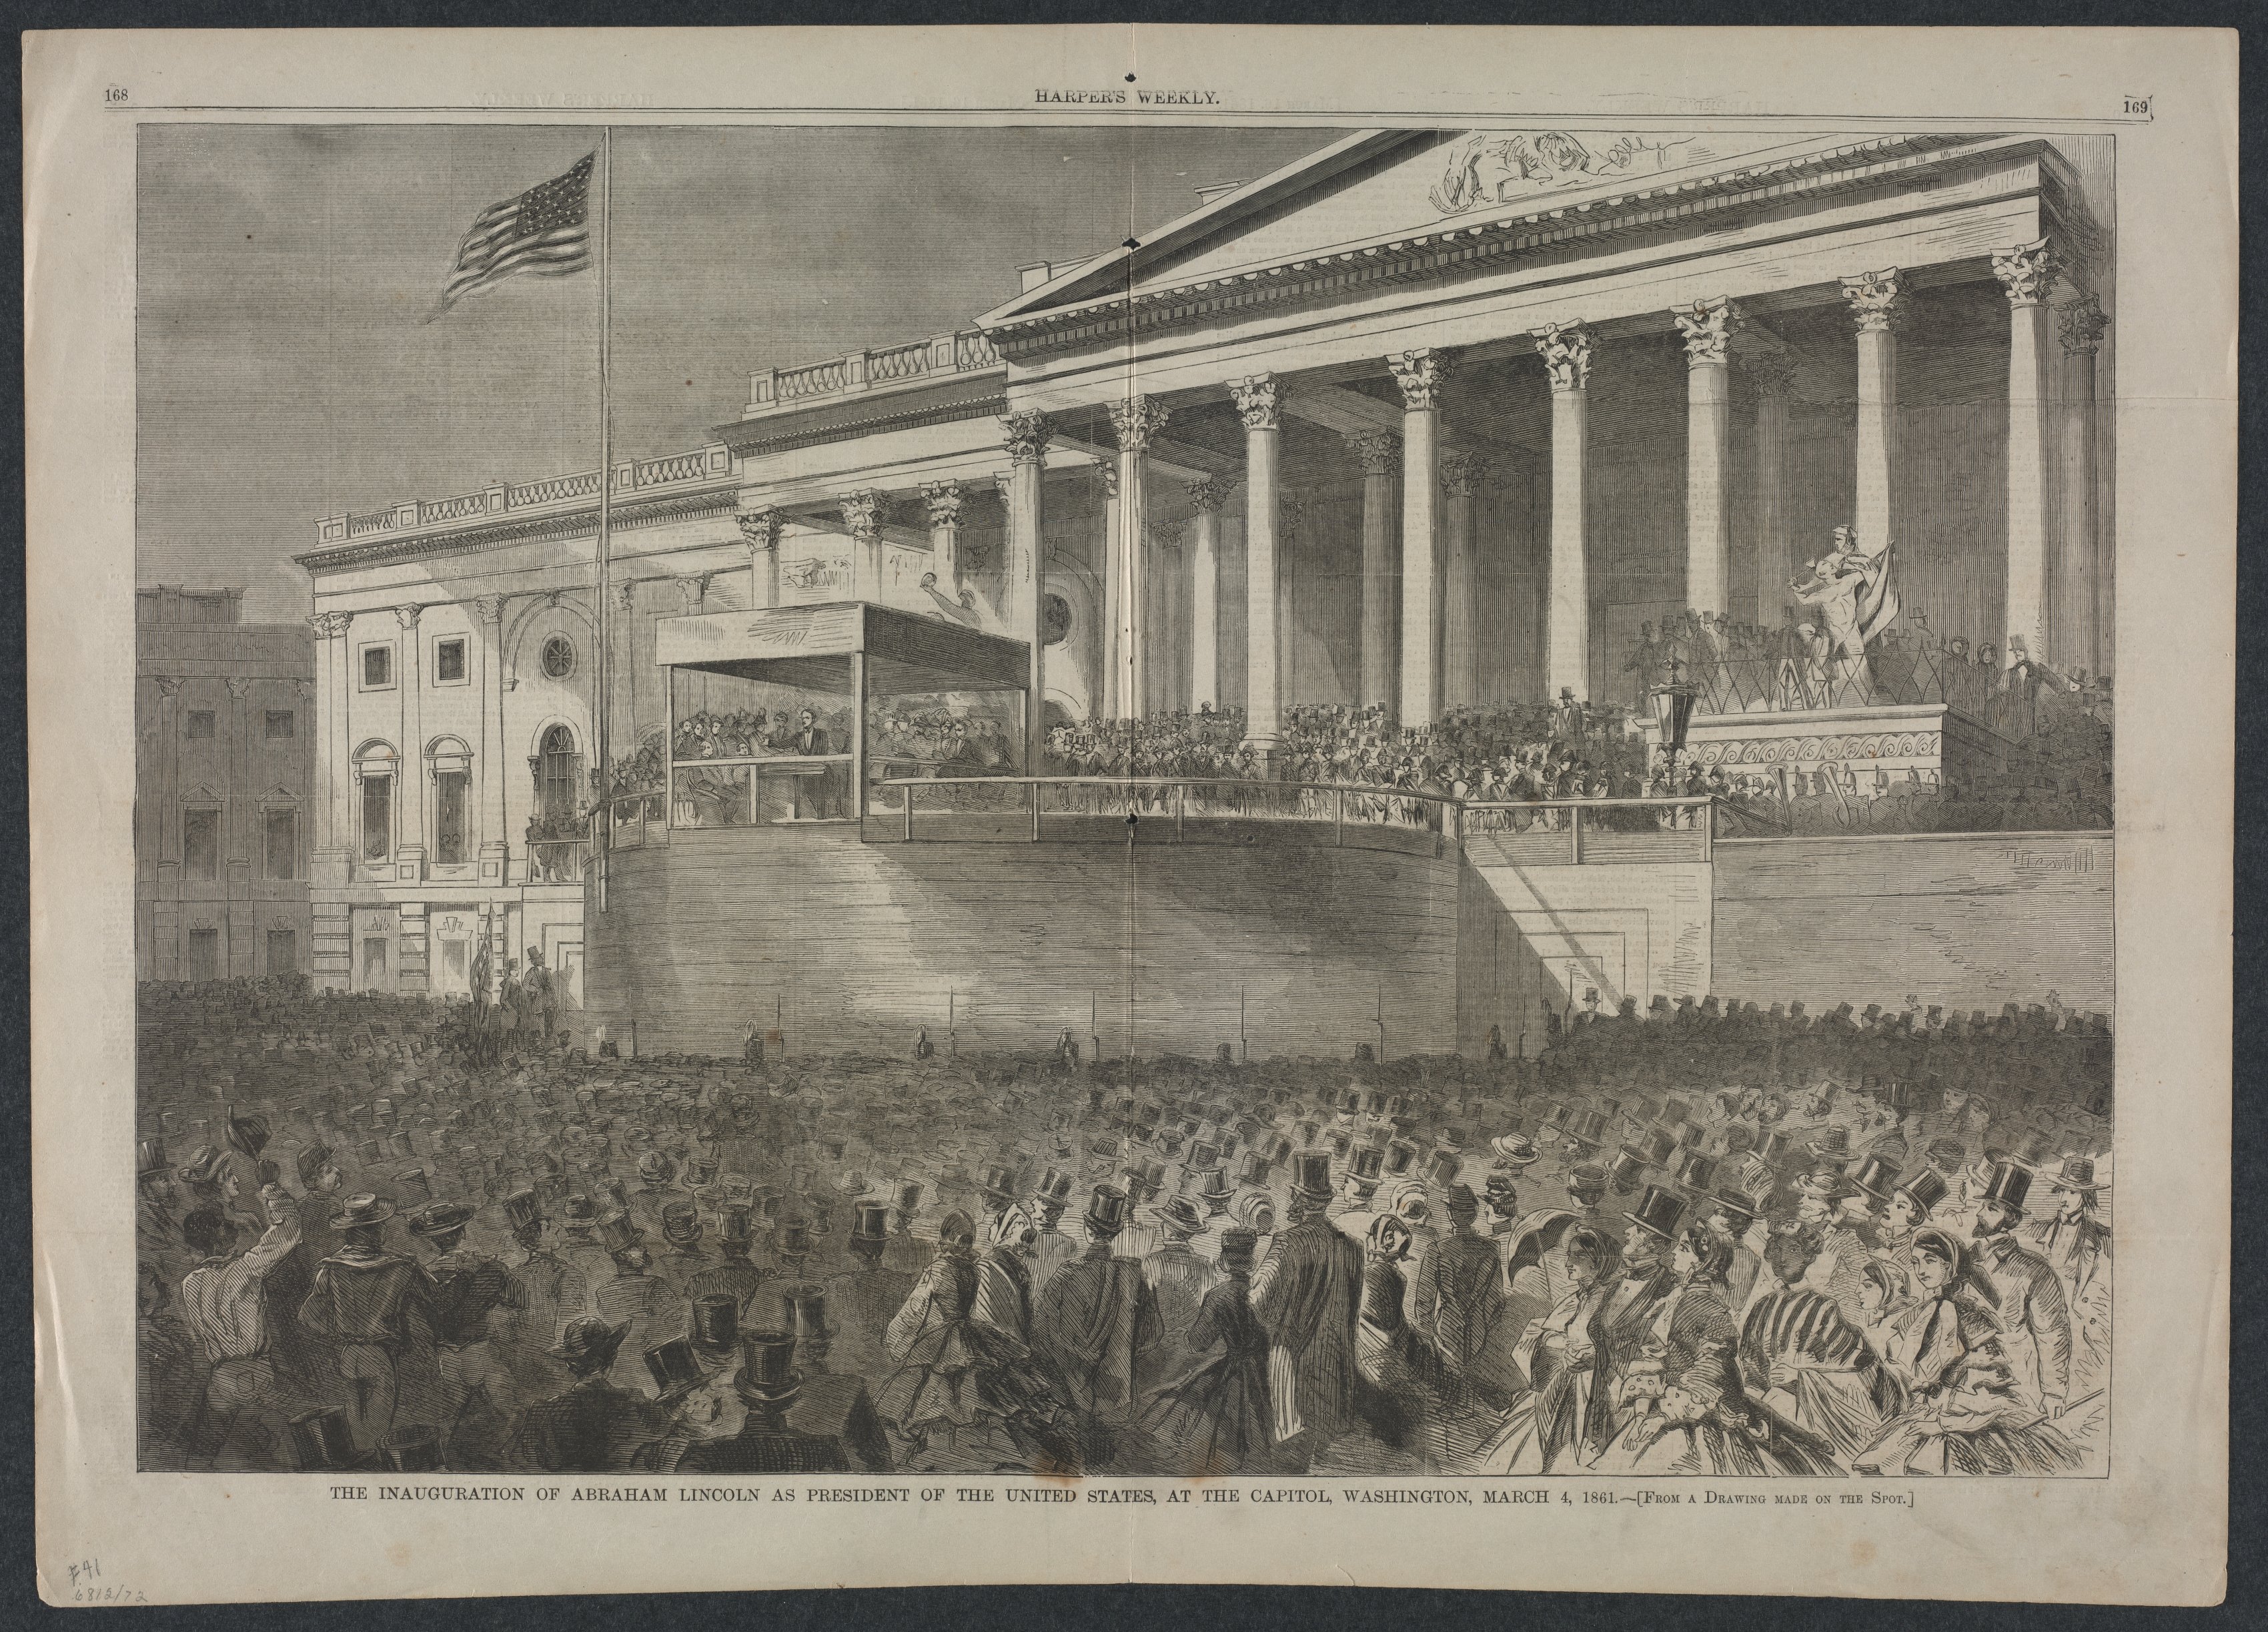 The Inauguration of Abraham Lincoln as President of the United States, at the Capitol, Washington, March 4, 1861